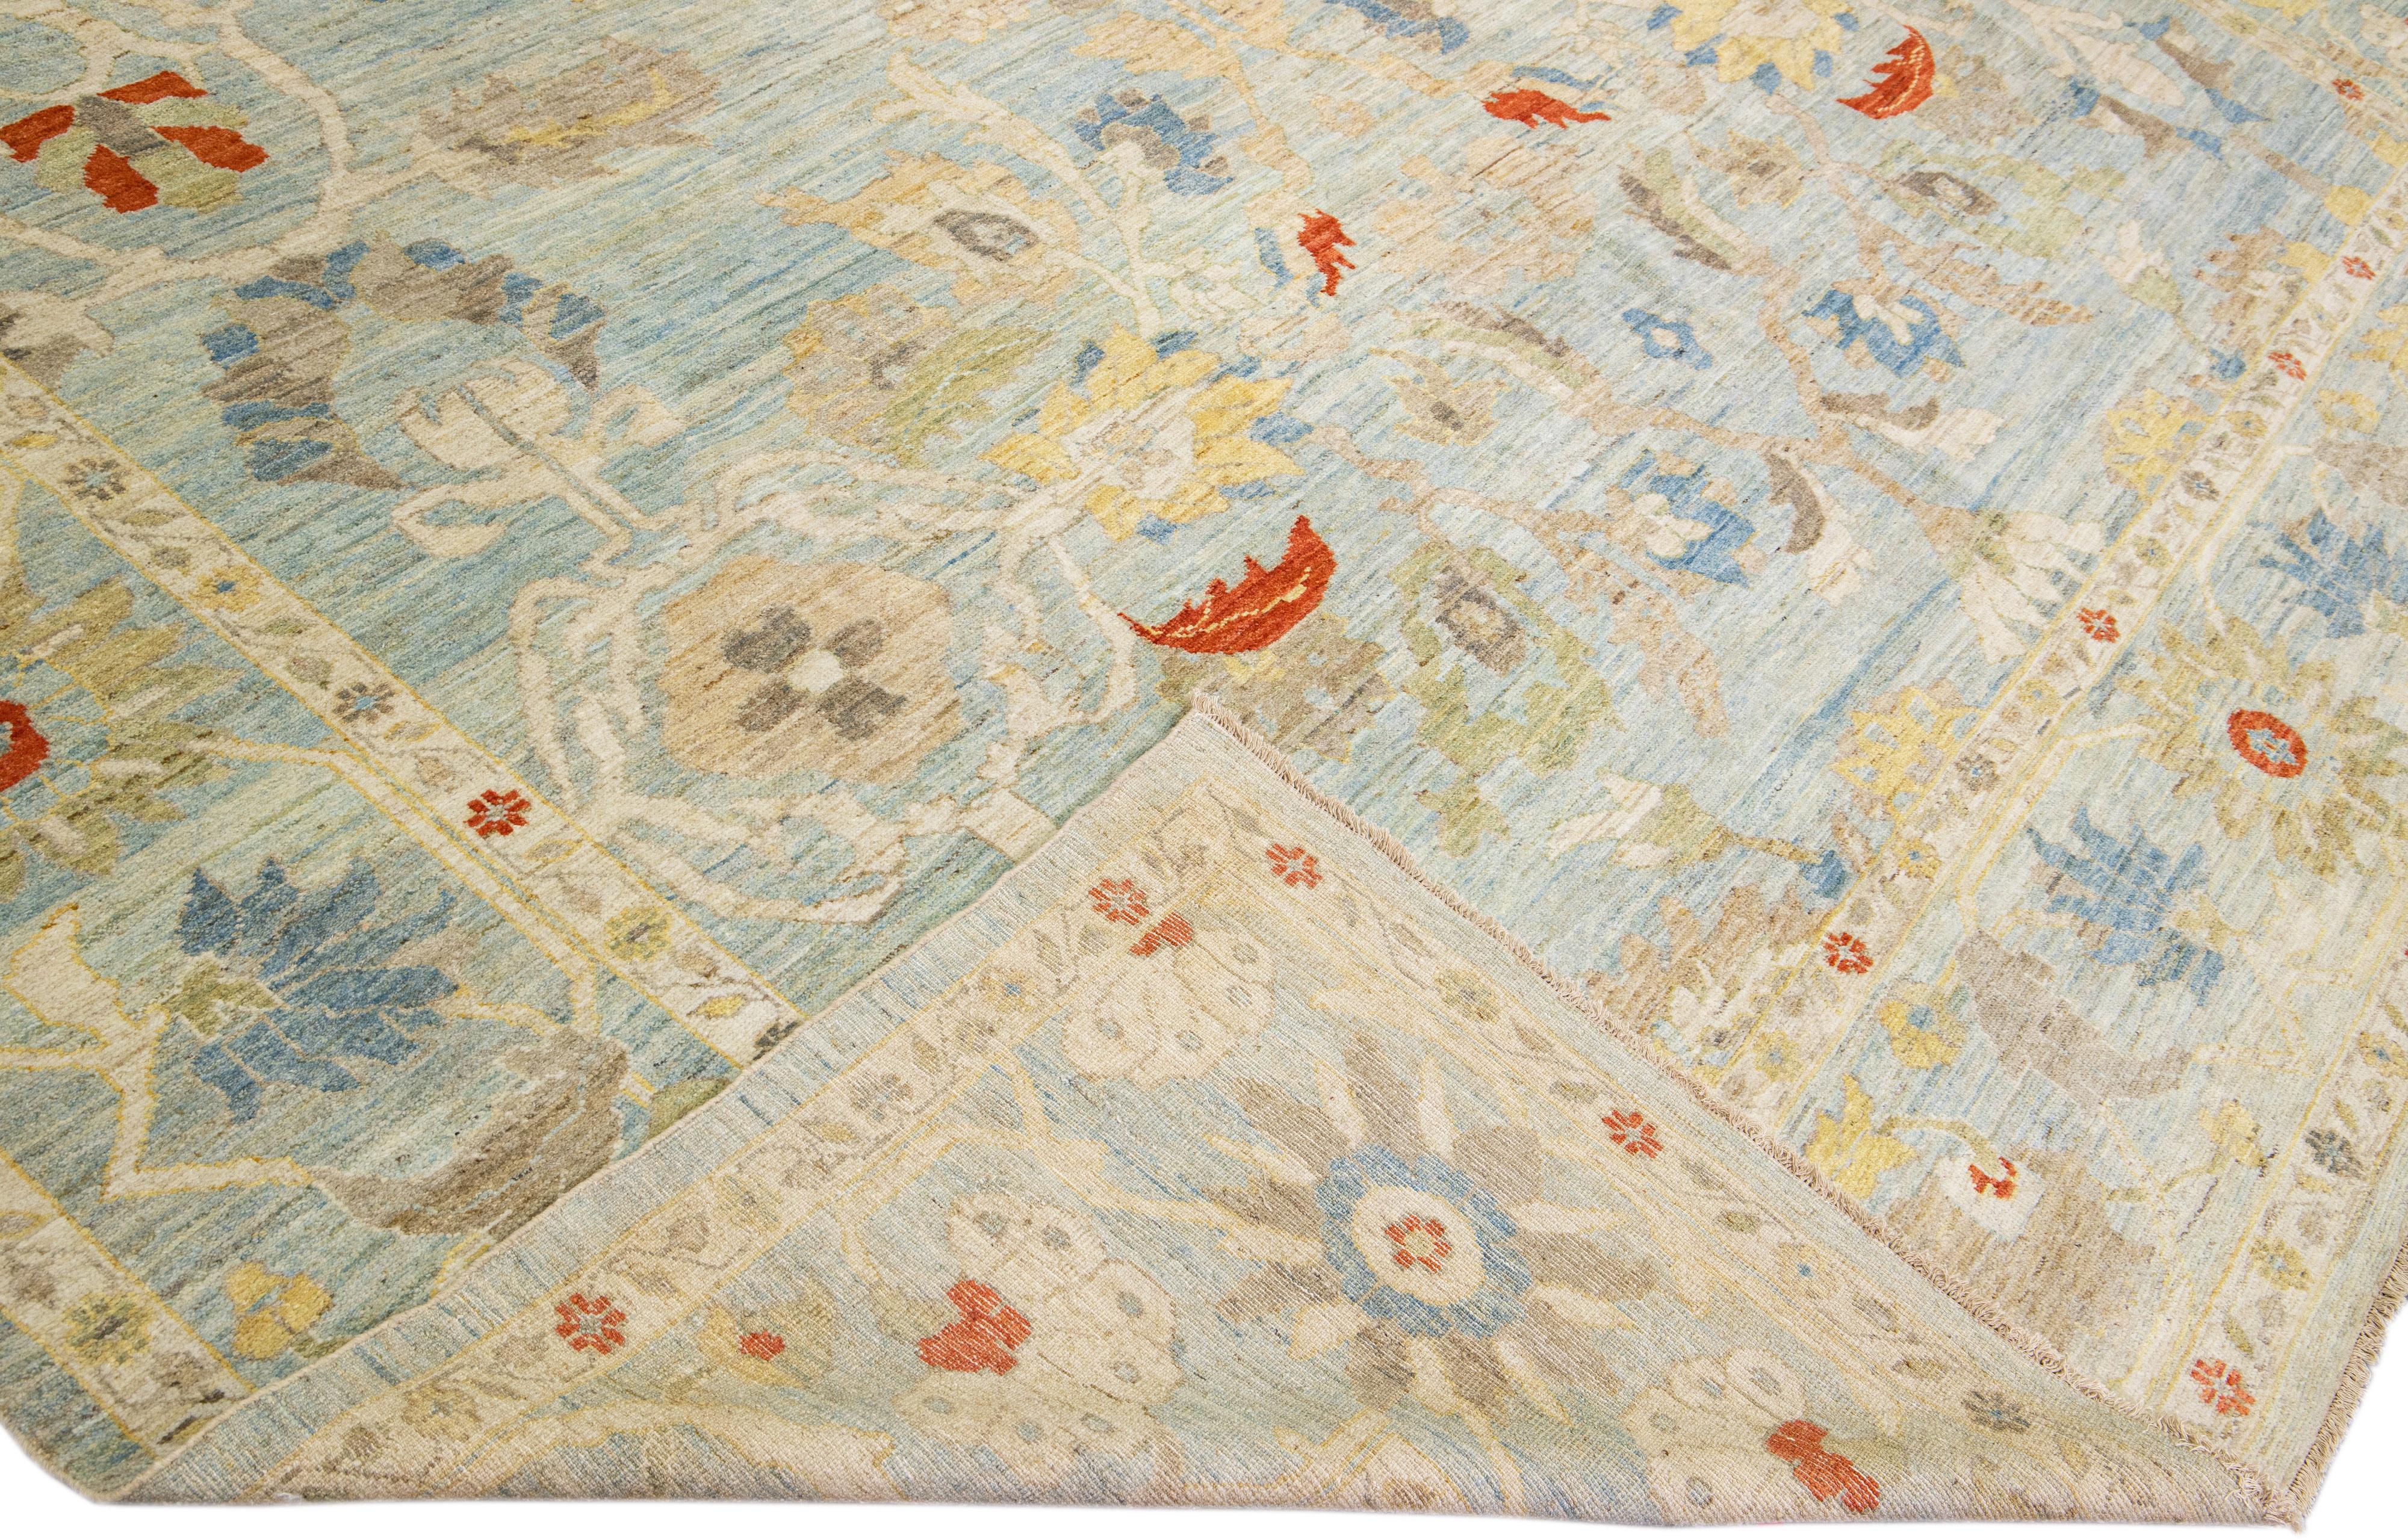 Beautiful modern Sultanabad hand-knotted wool rug with a light blue field. This Sultanabad rug has multicolor accents in a gorgeous all-over classic floral pattern design.

This rug measures: 14